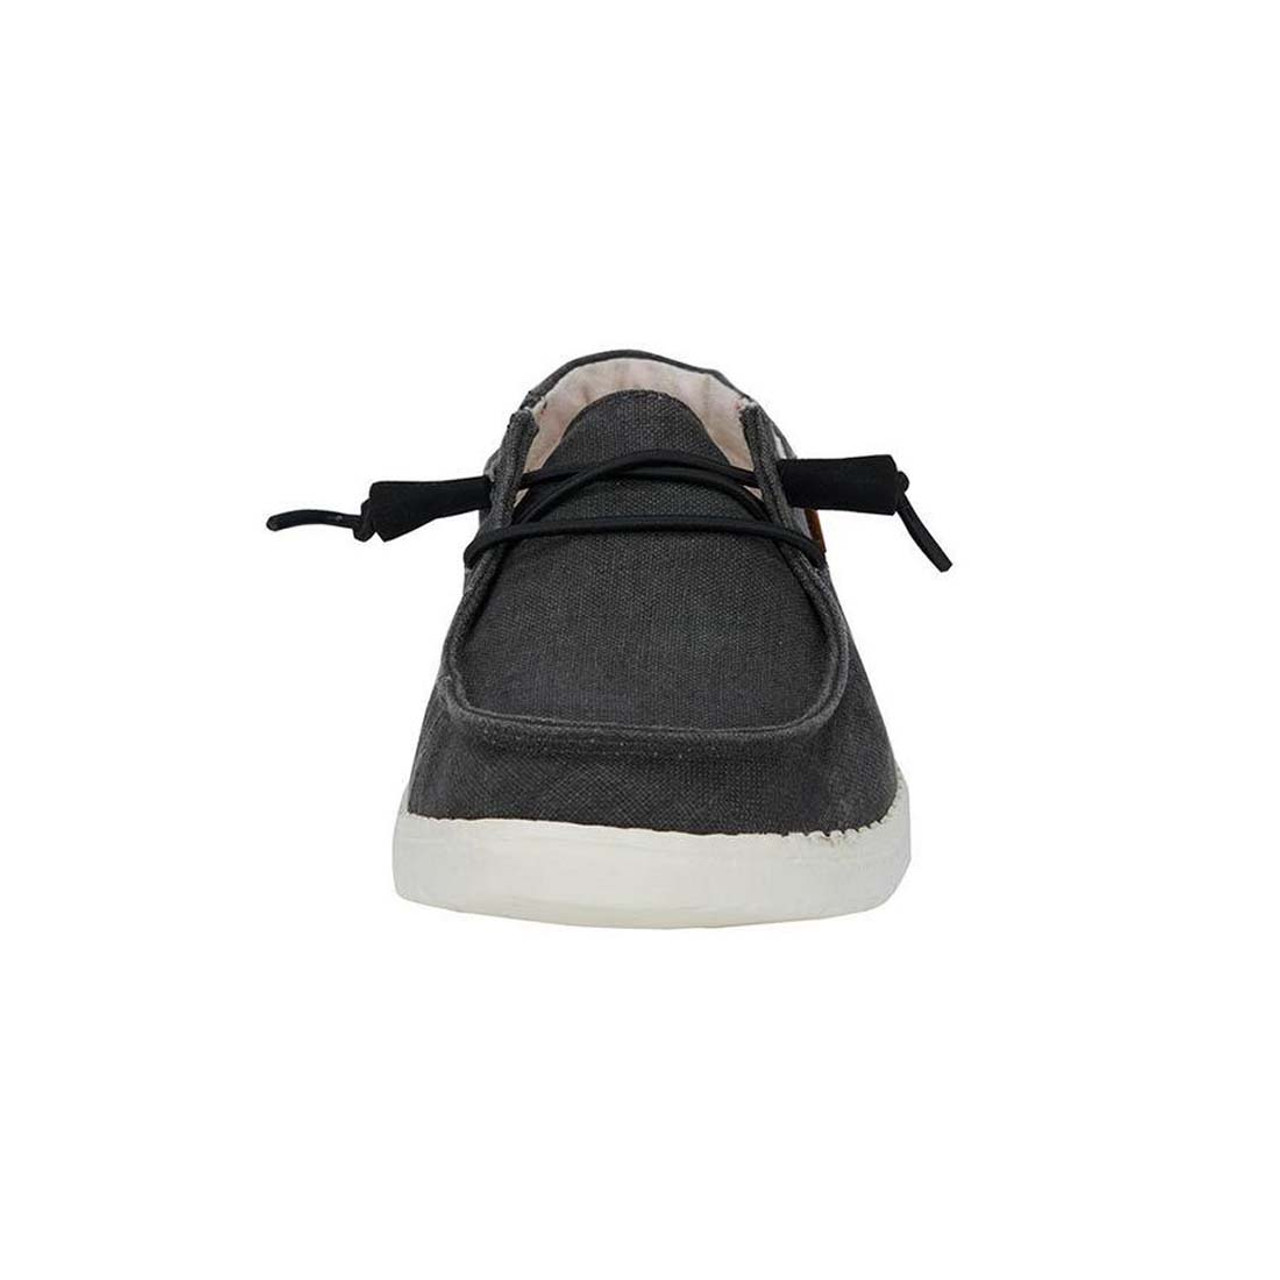 Hey Dude Hey Dude Women's Wendy Chambray Shoes - Off Black $ 54.99